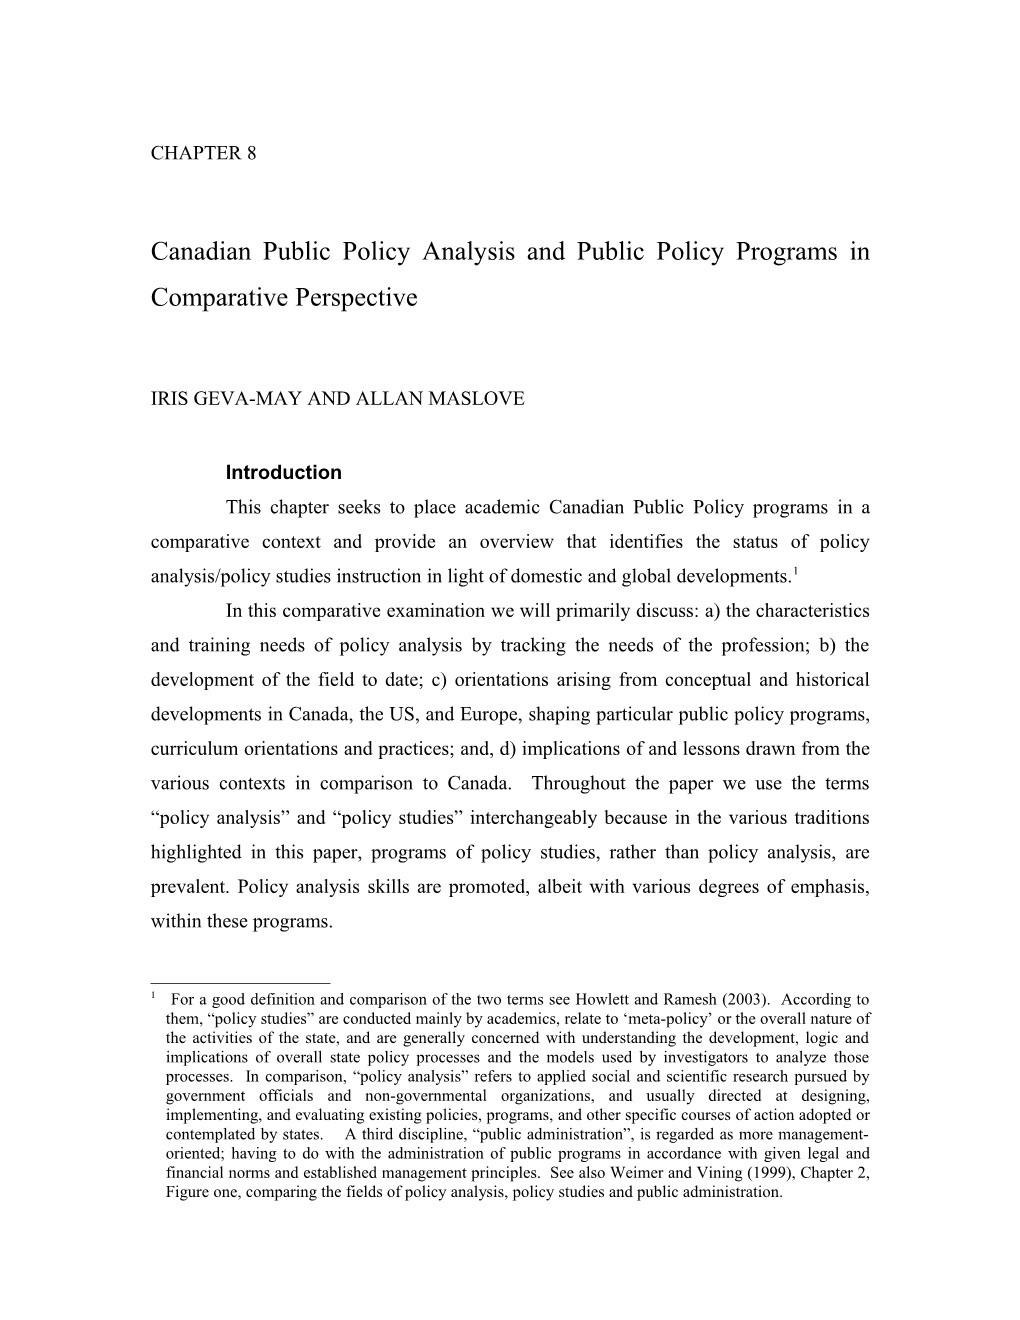 Canadian Public Policy Analysis and Public Policy Programs in Comparative Perspective